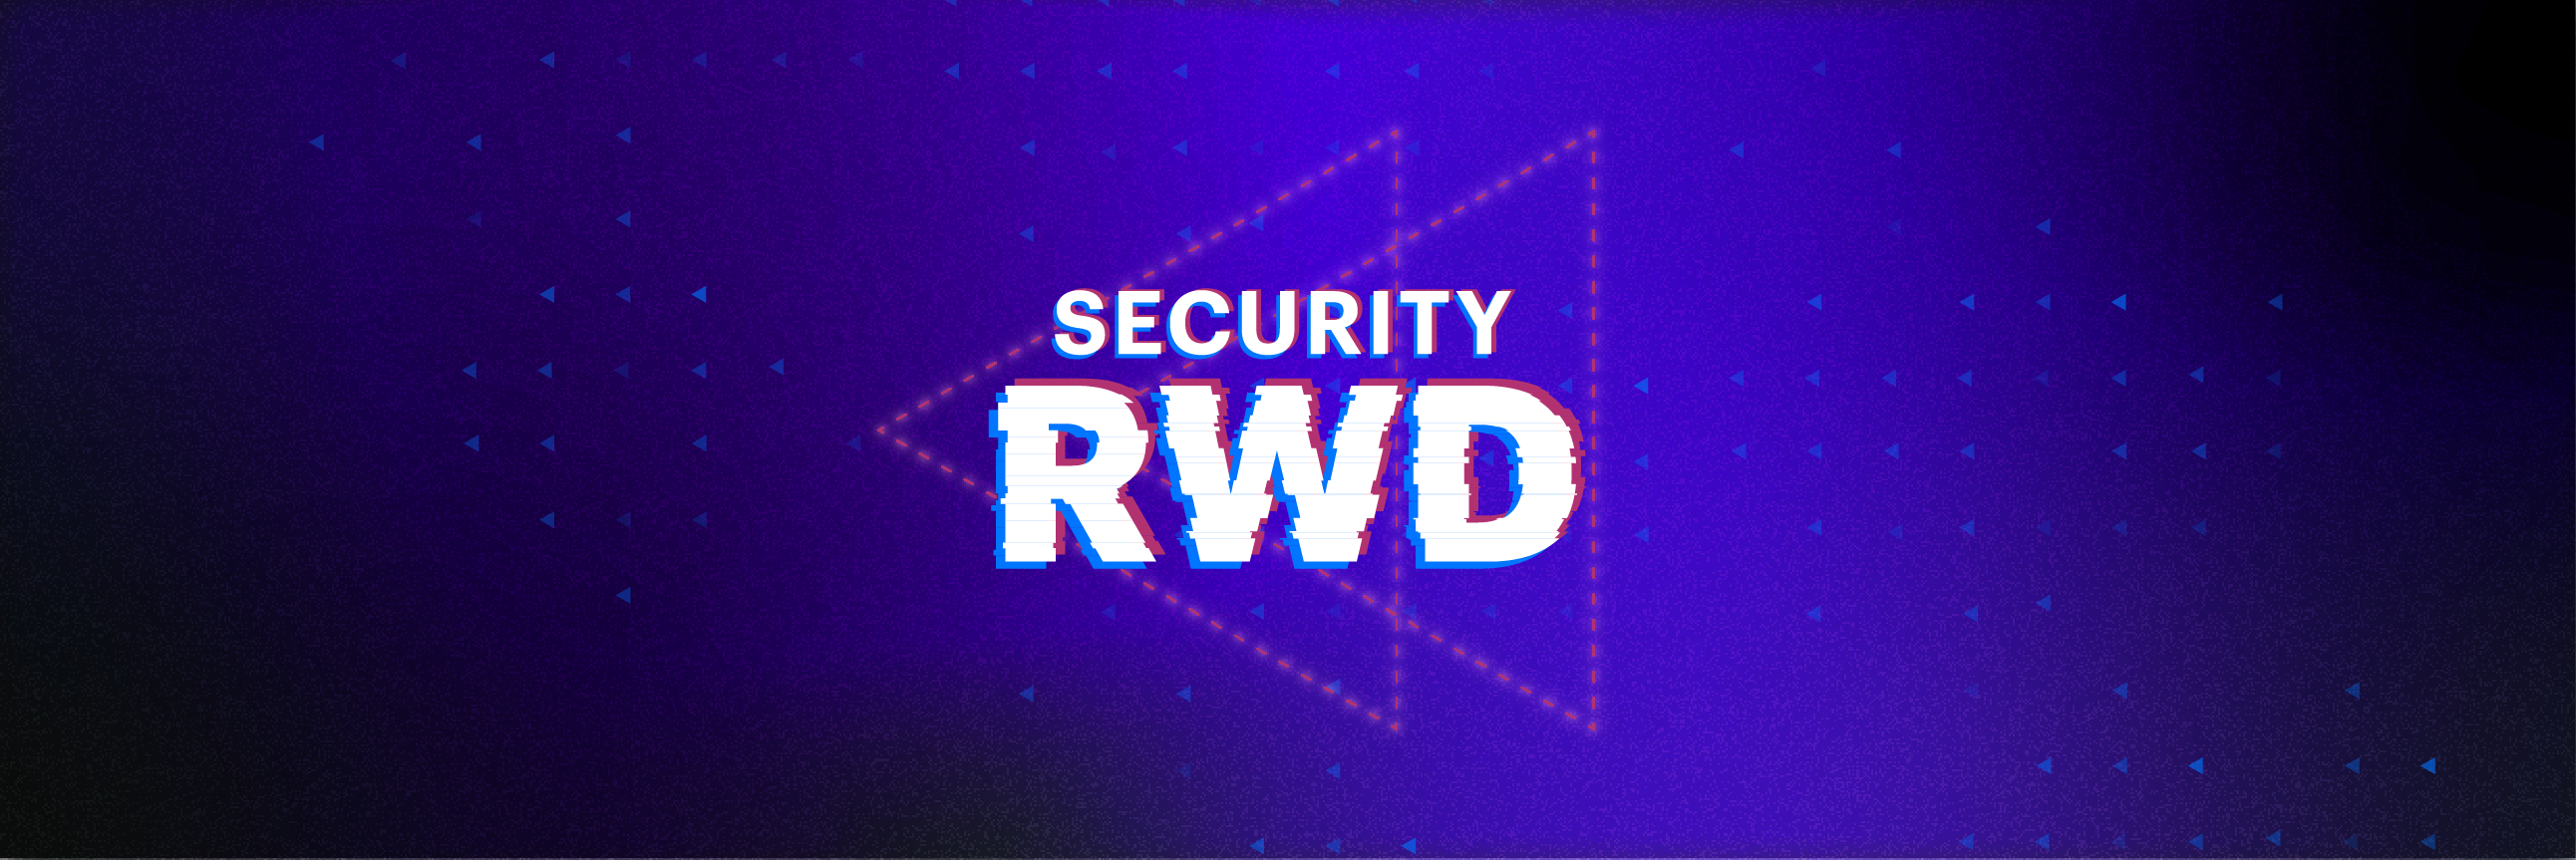 SecurityRWD - Introduction to AWS Identity and Access Management (IAM)